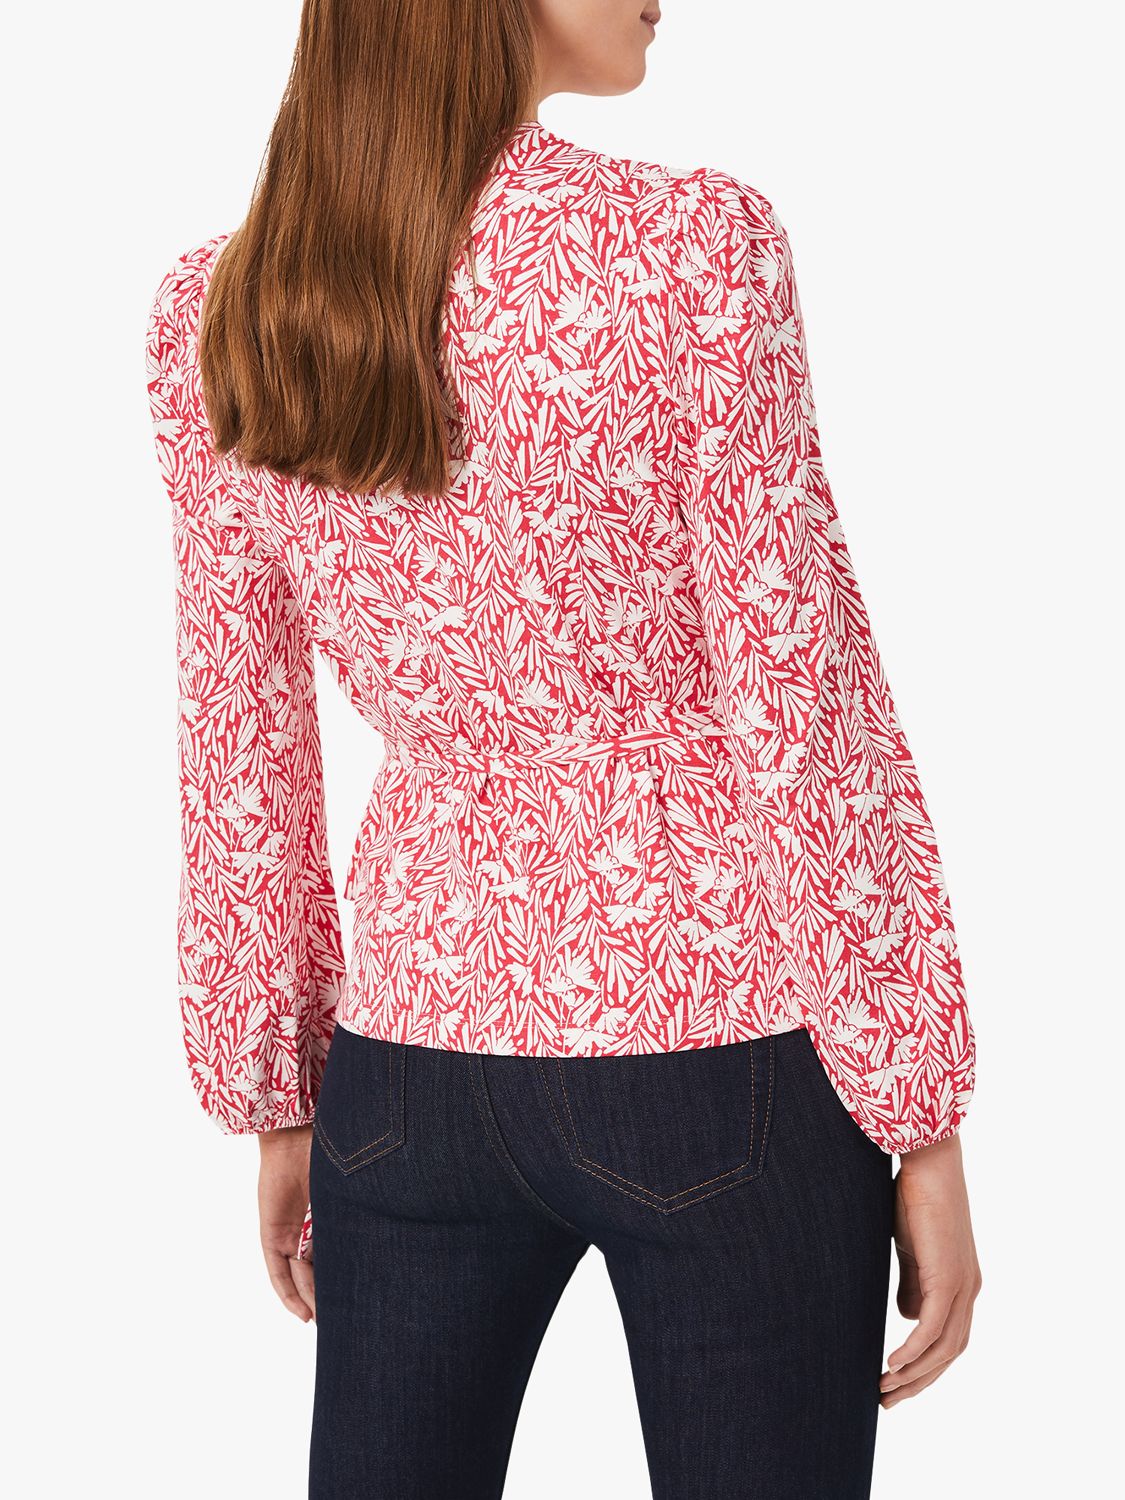 Hobbs Livvy Wrap Floral Top, Coral Red at John Lewis & Partners